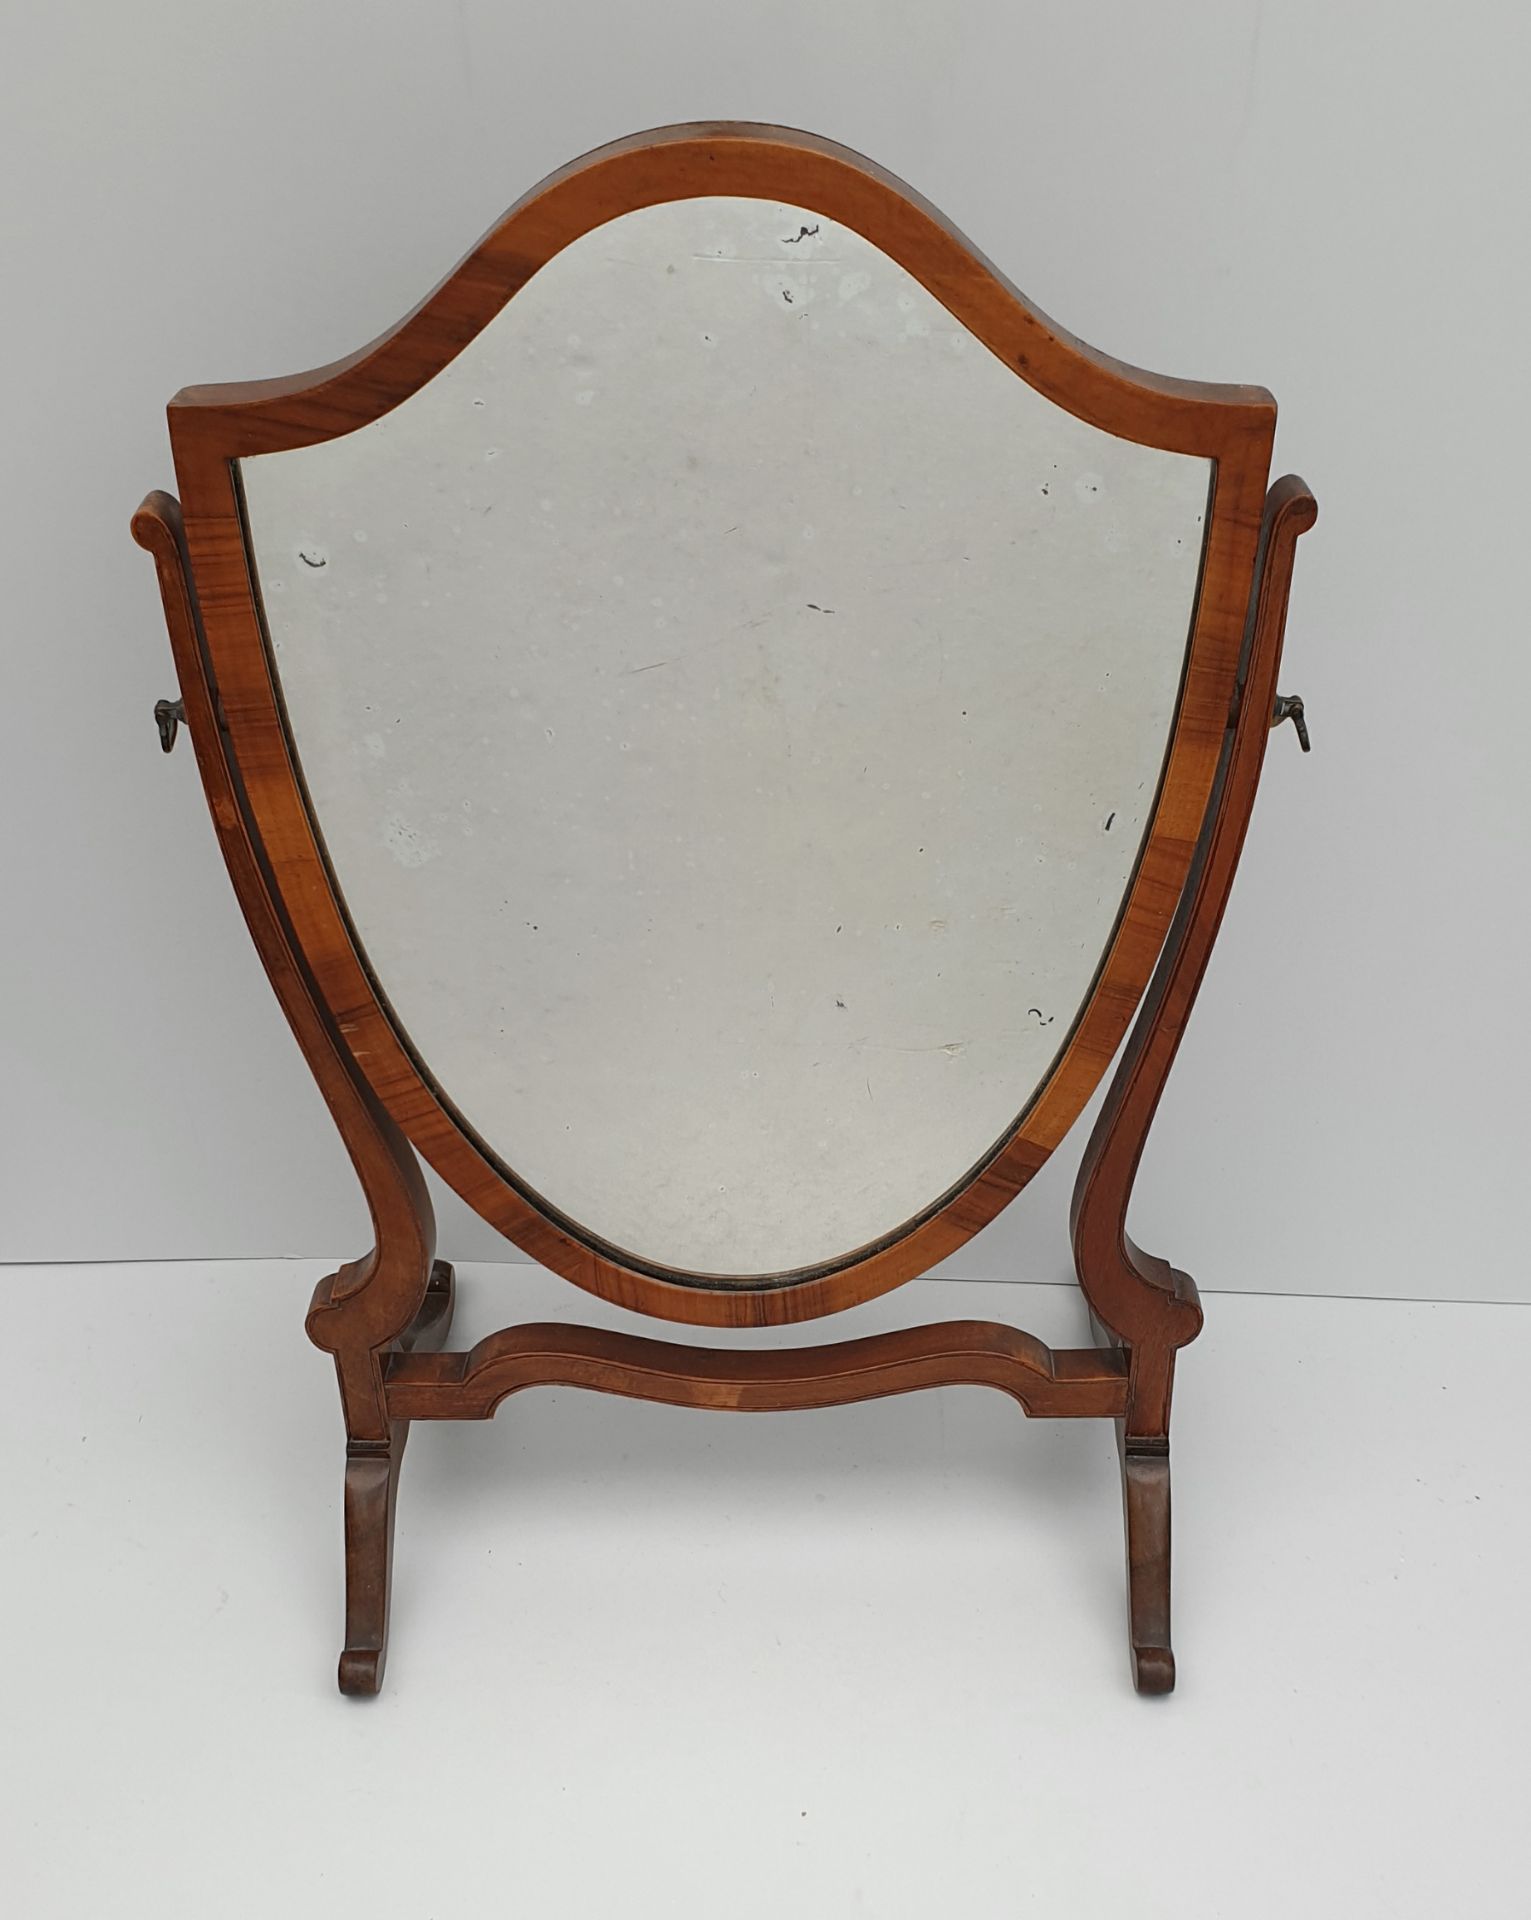 Edwardian Harwood Mirror Shield Shape Measures 14 inches by 23 inches tall.